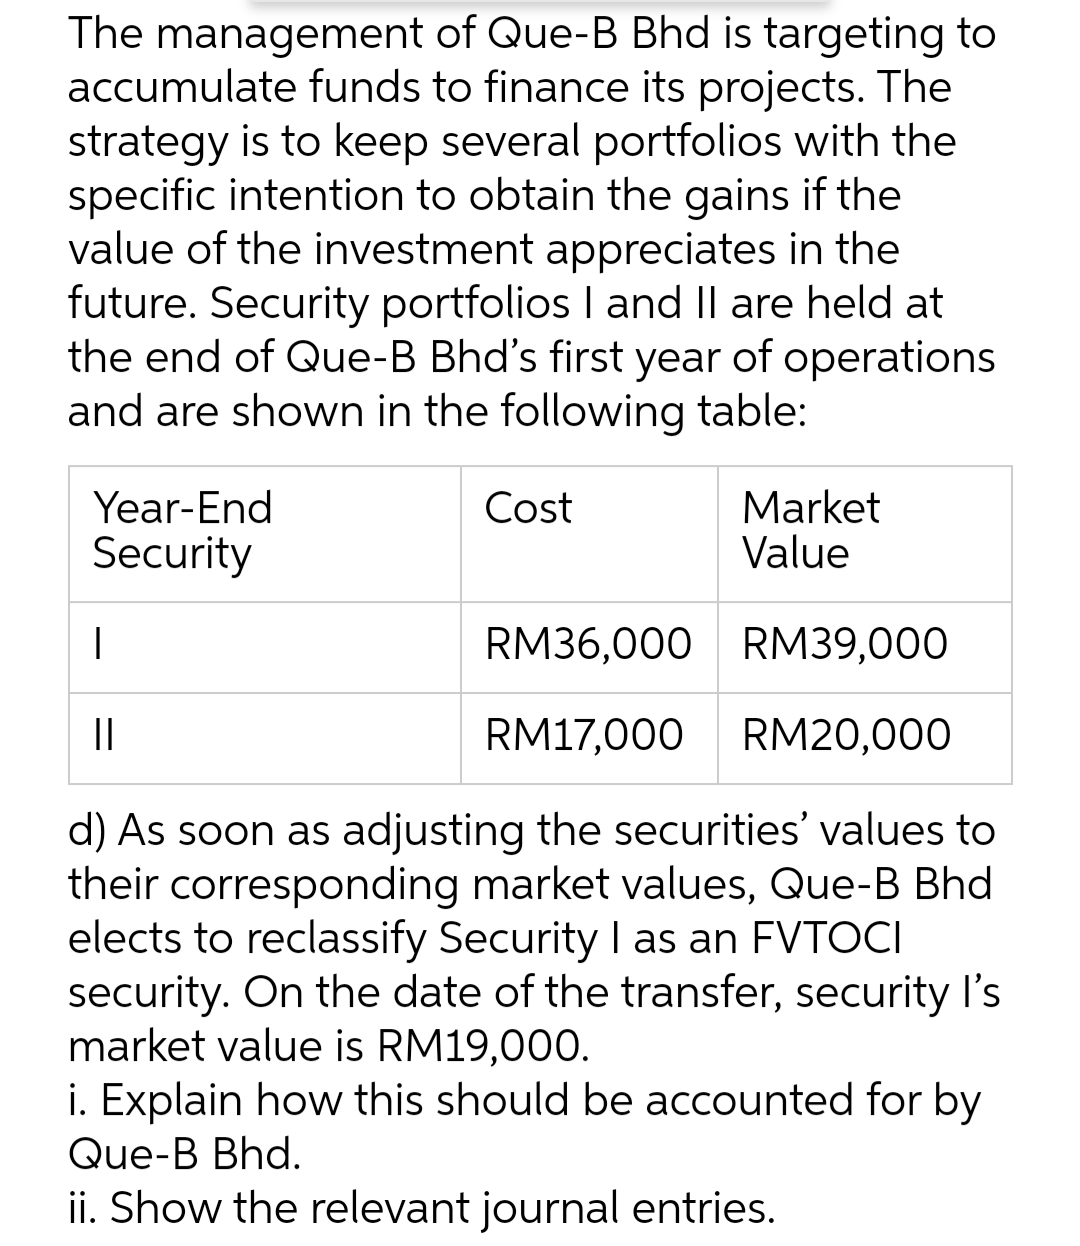 The management of Que-B Bhd is targeting to
accumulate funds to finance its projects. The
strategy is to keep several portfolios with the
specific intention to obtain the gains if the
value of the investment appreciates in the
future. Security portfolios I and Il are held at
the end of Que-B Bhd's first year of operations
and are shown in the following table:
Year-End
Security
Cost
Market
Value
RM36,000 RM39,000
||
RM17,000
RM20,000
d) As soon as adjusting the securities' values to
their corresponding market values, Que-B Bhd
elects to reclassify Security I as an FVTOCI
security. On the date of the transfer, security l's
market value is RM19,000.
i. Explain how this should be accounted for by
Que-B Bhd.
ii. Show the relevant journal entries.
